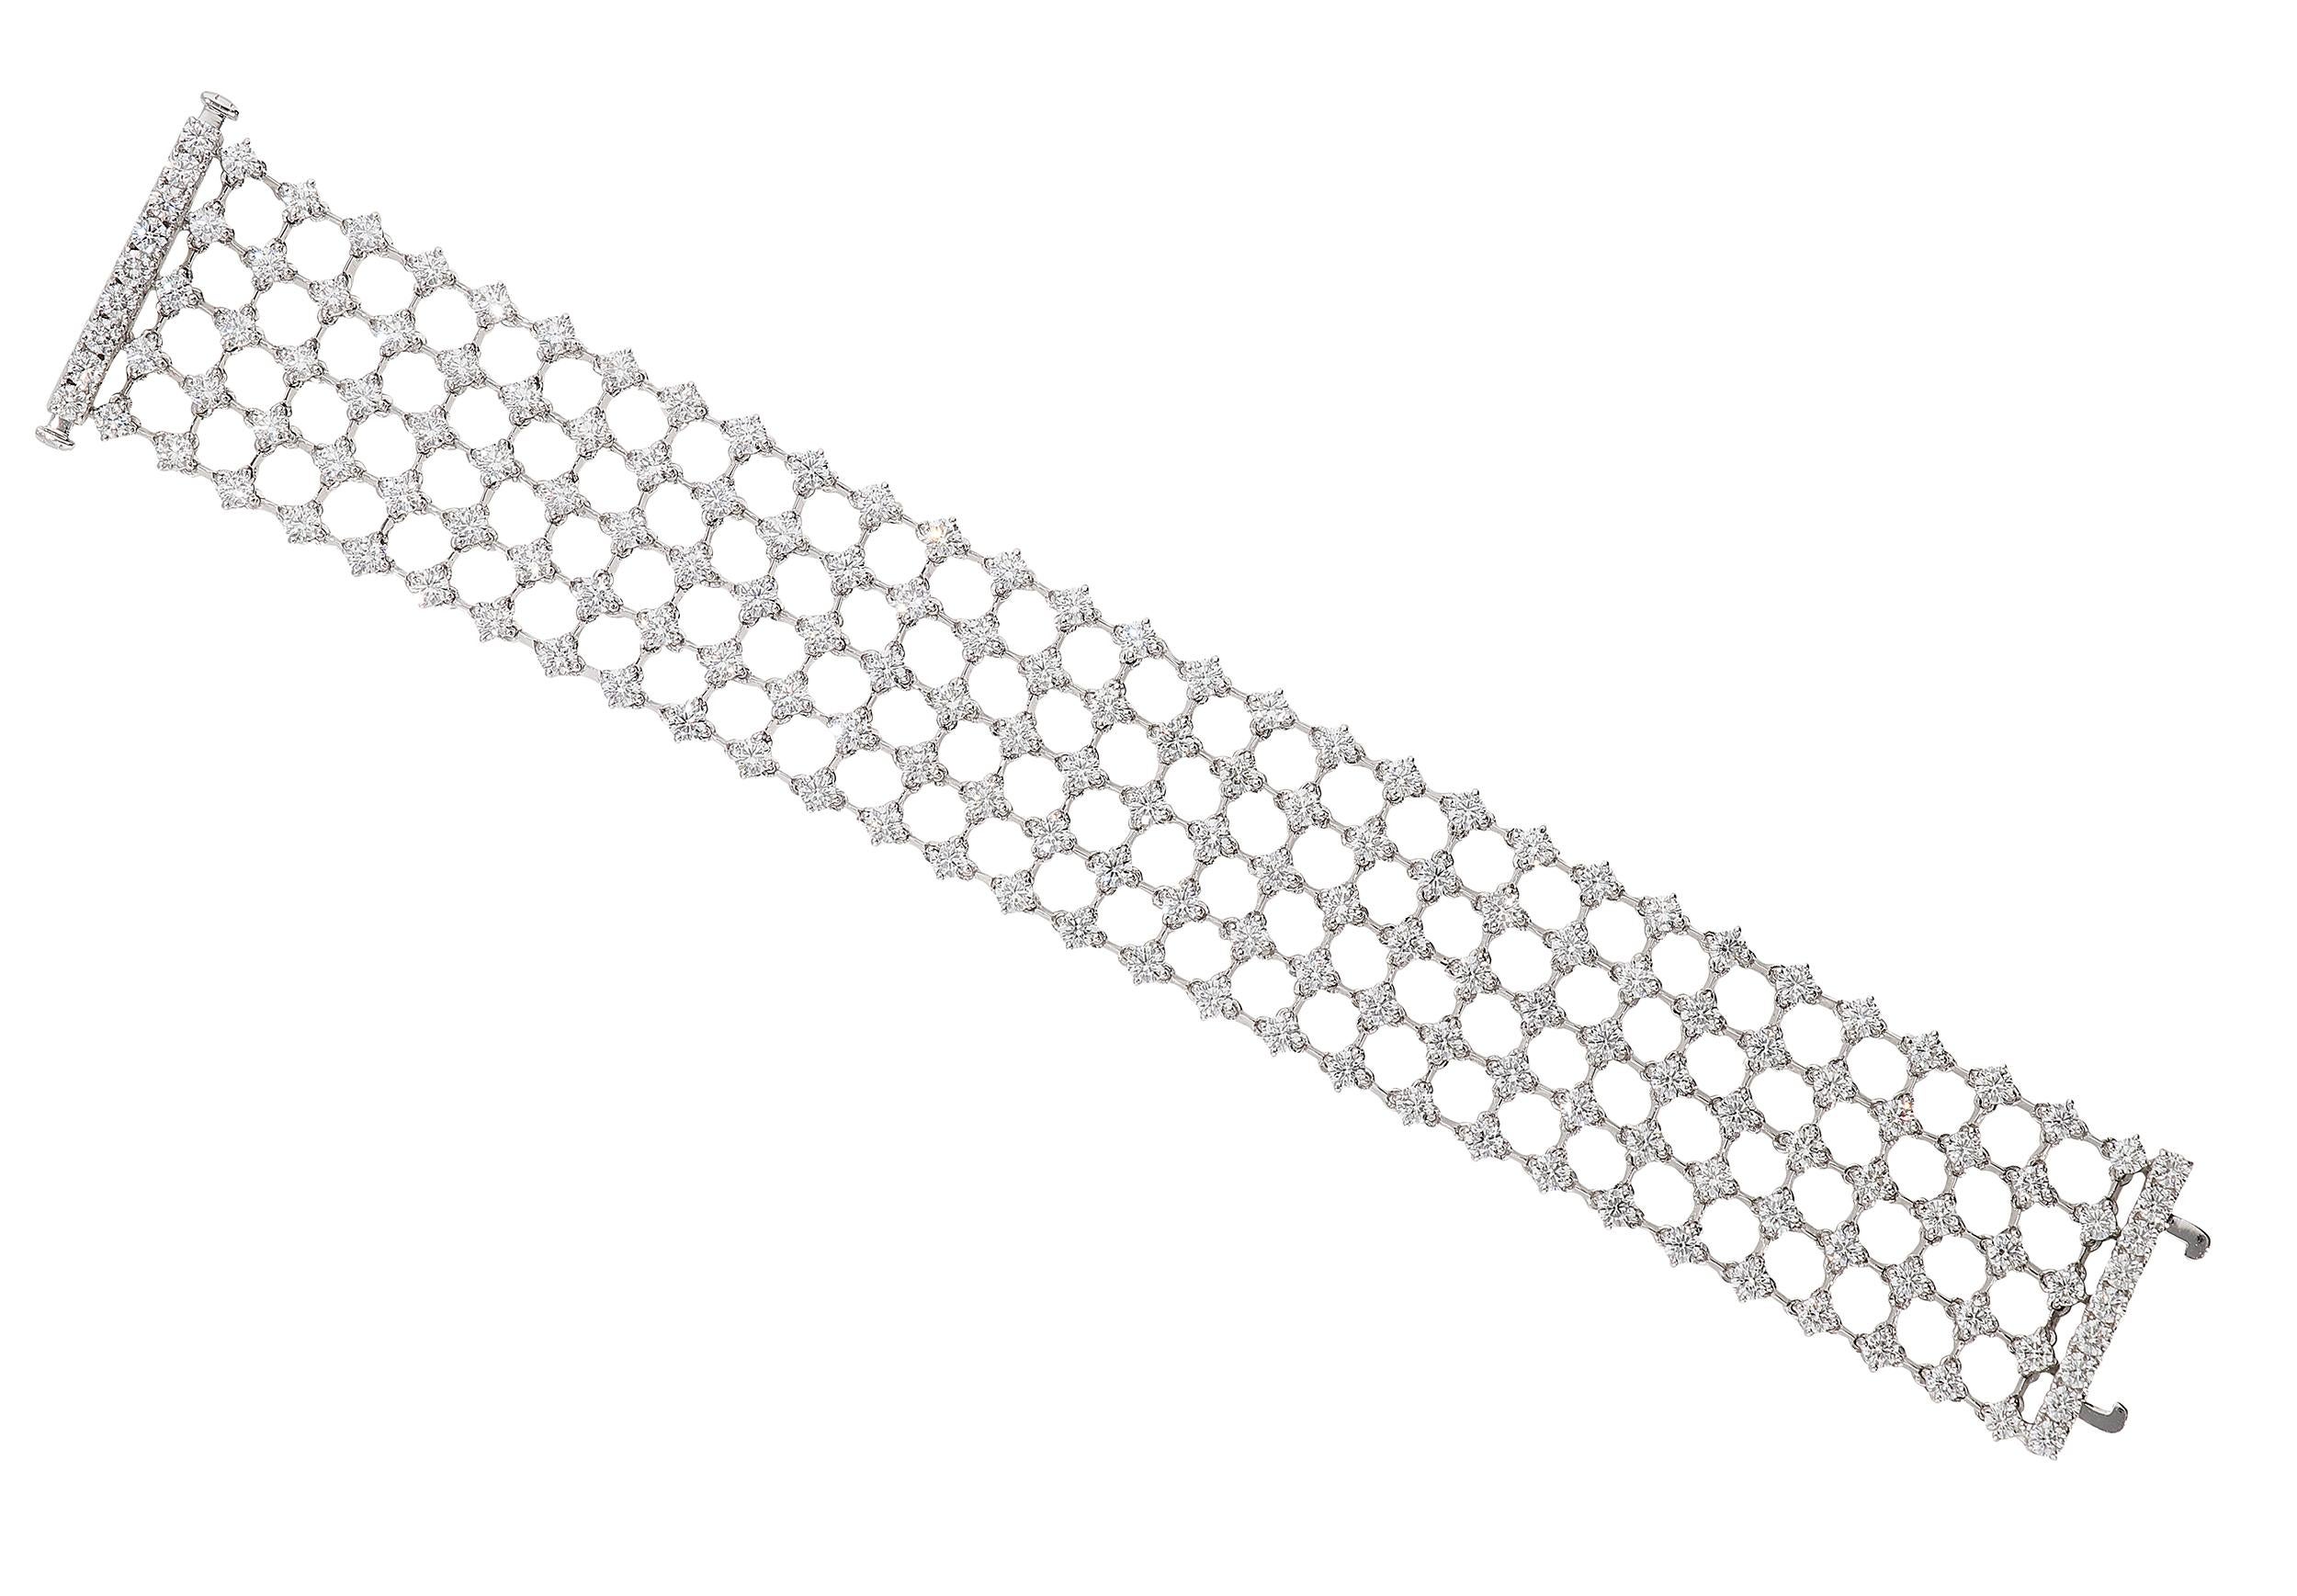 Princely bracelet in 18kt white gold for 42,00 grams on 18,50 centimeters of length and a width of 2.70 centimeters. The beautiful clasp is characterized by a perfect rectangle made by 16 stones and 2 buttons on the sides. Its peculiarity is the